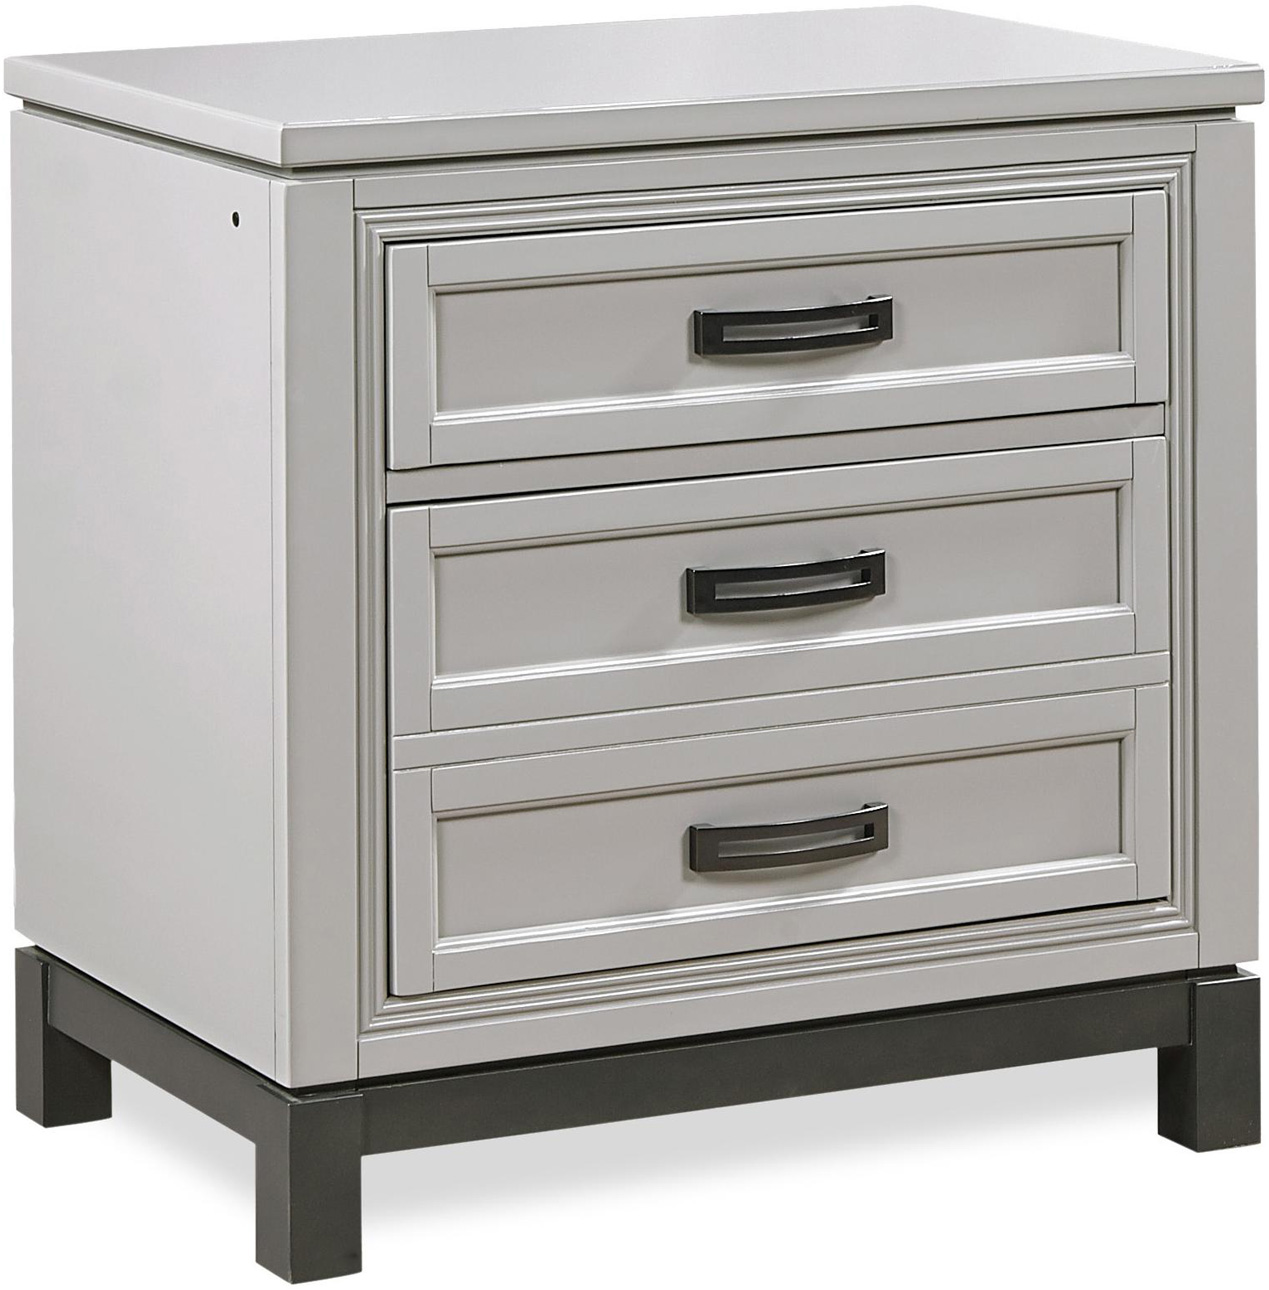 Hyde Park Liv.360 Nightstand in the Gray Paint finish